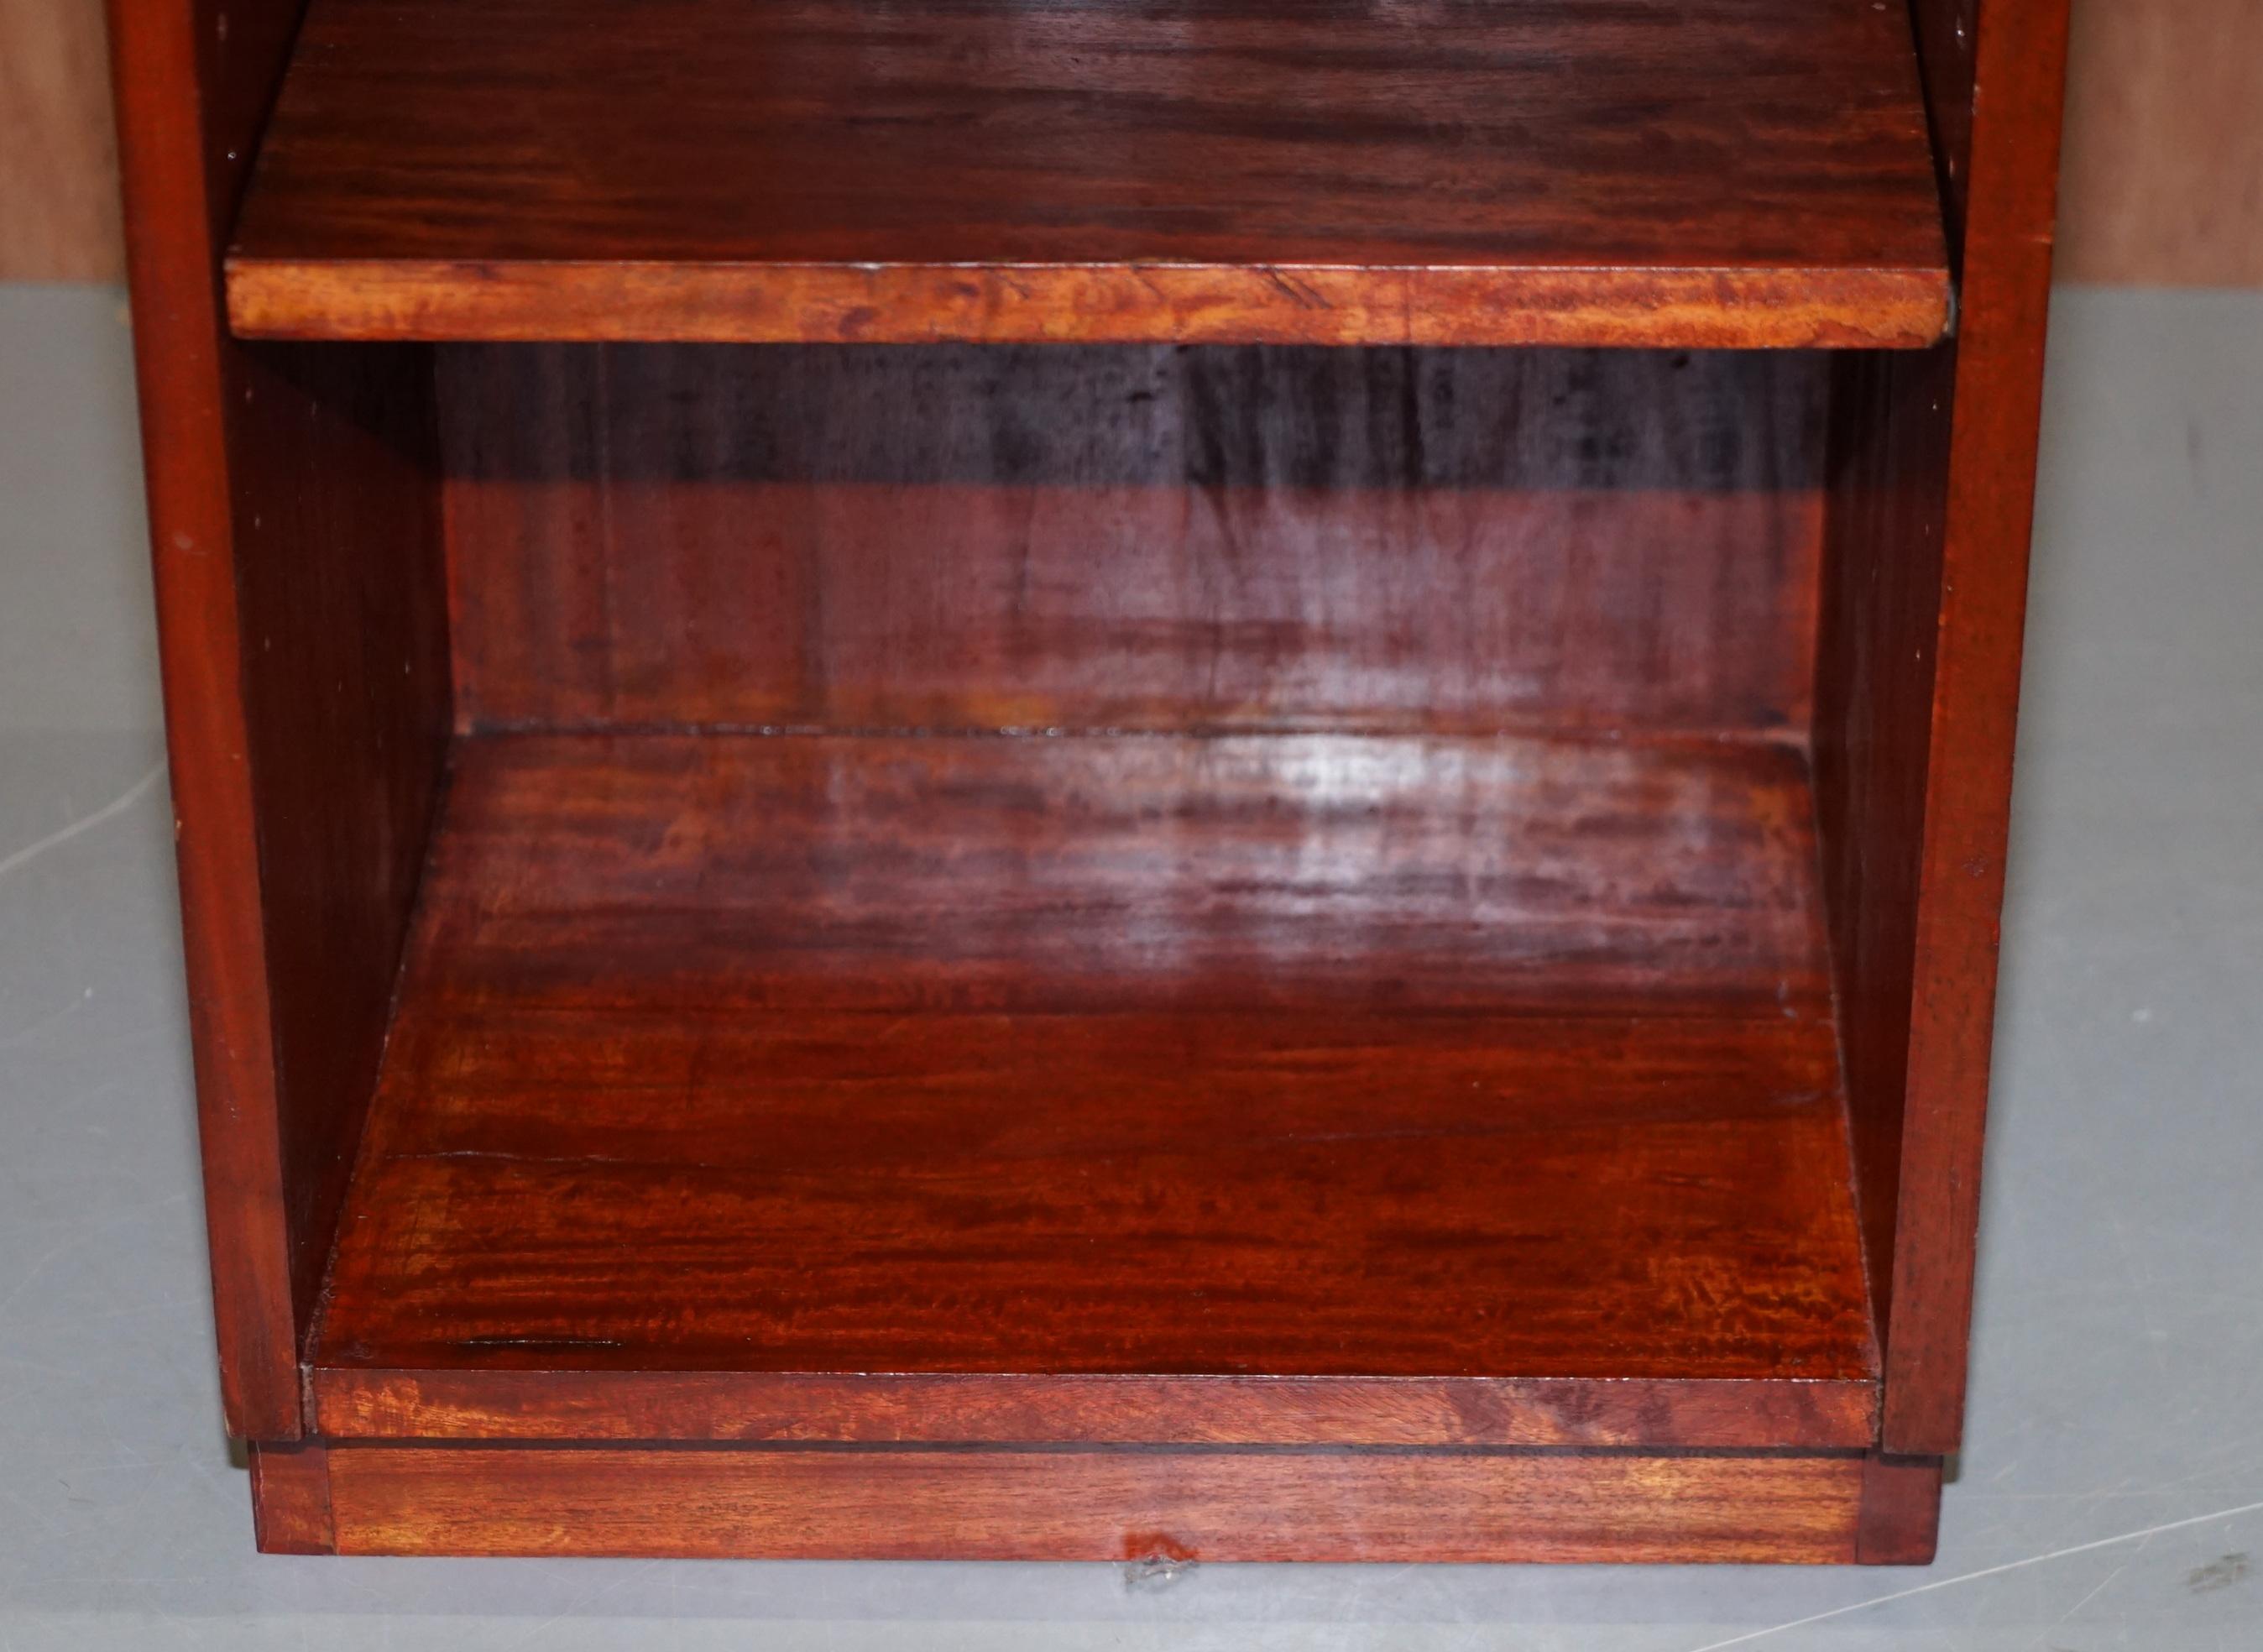 English Pair of Harrods Kennedy Mahogany Military Campaign Side Table Bookcase Shelves